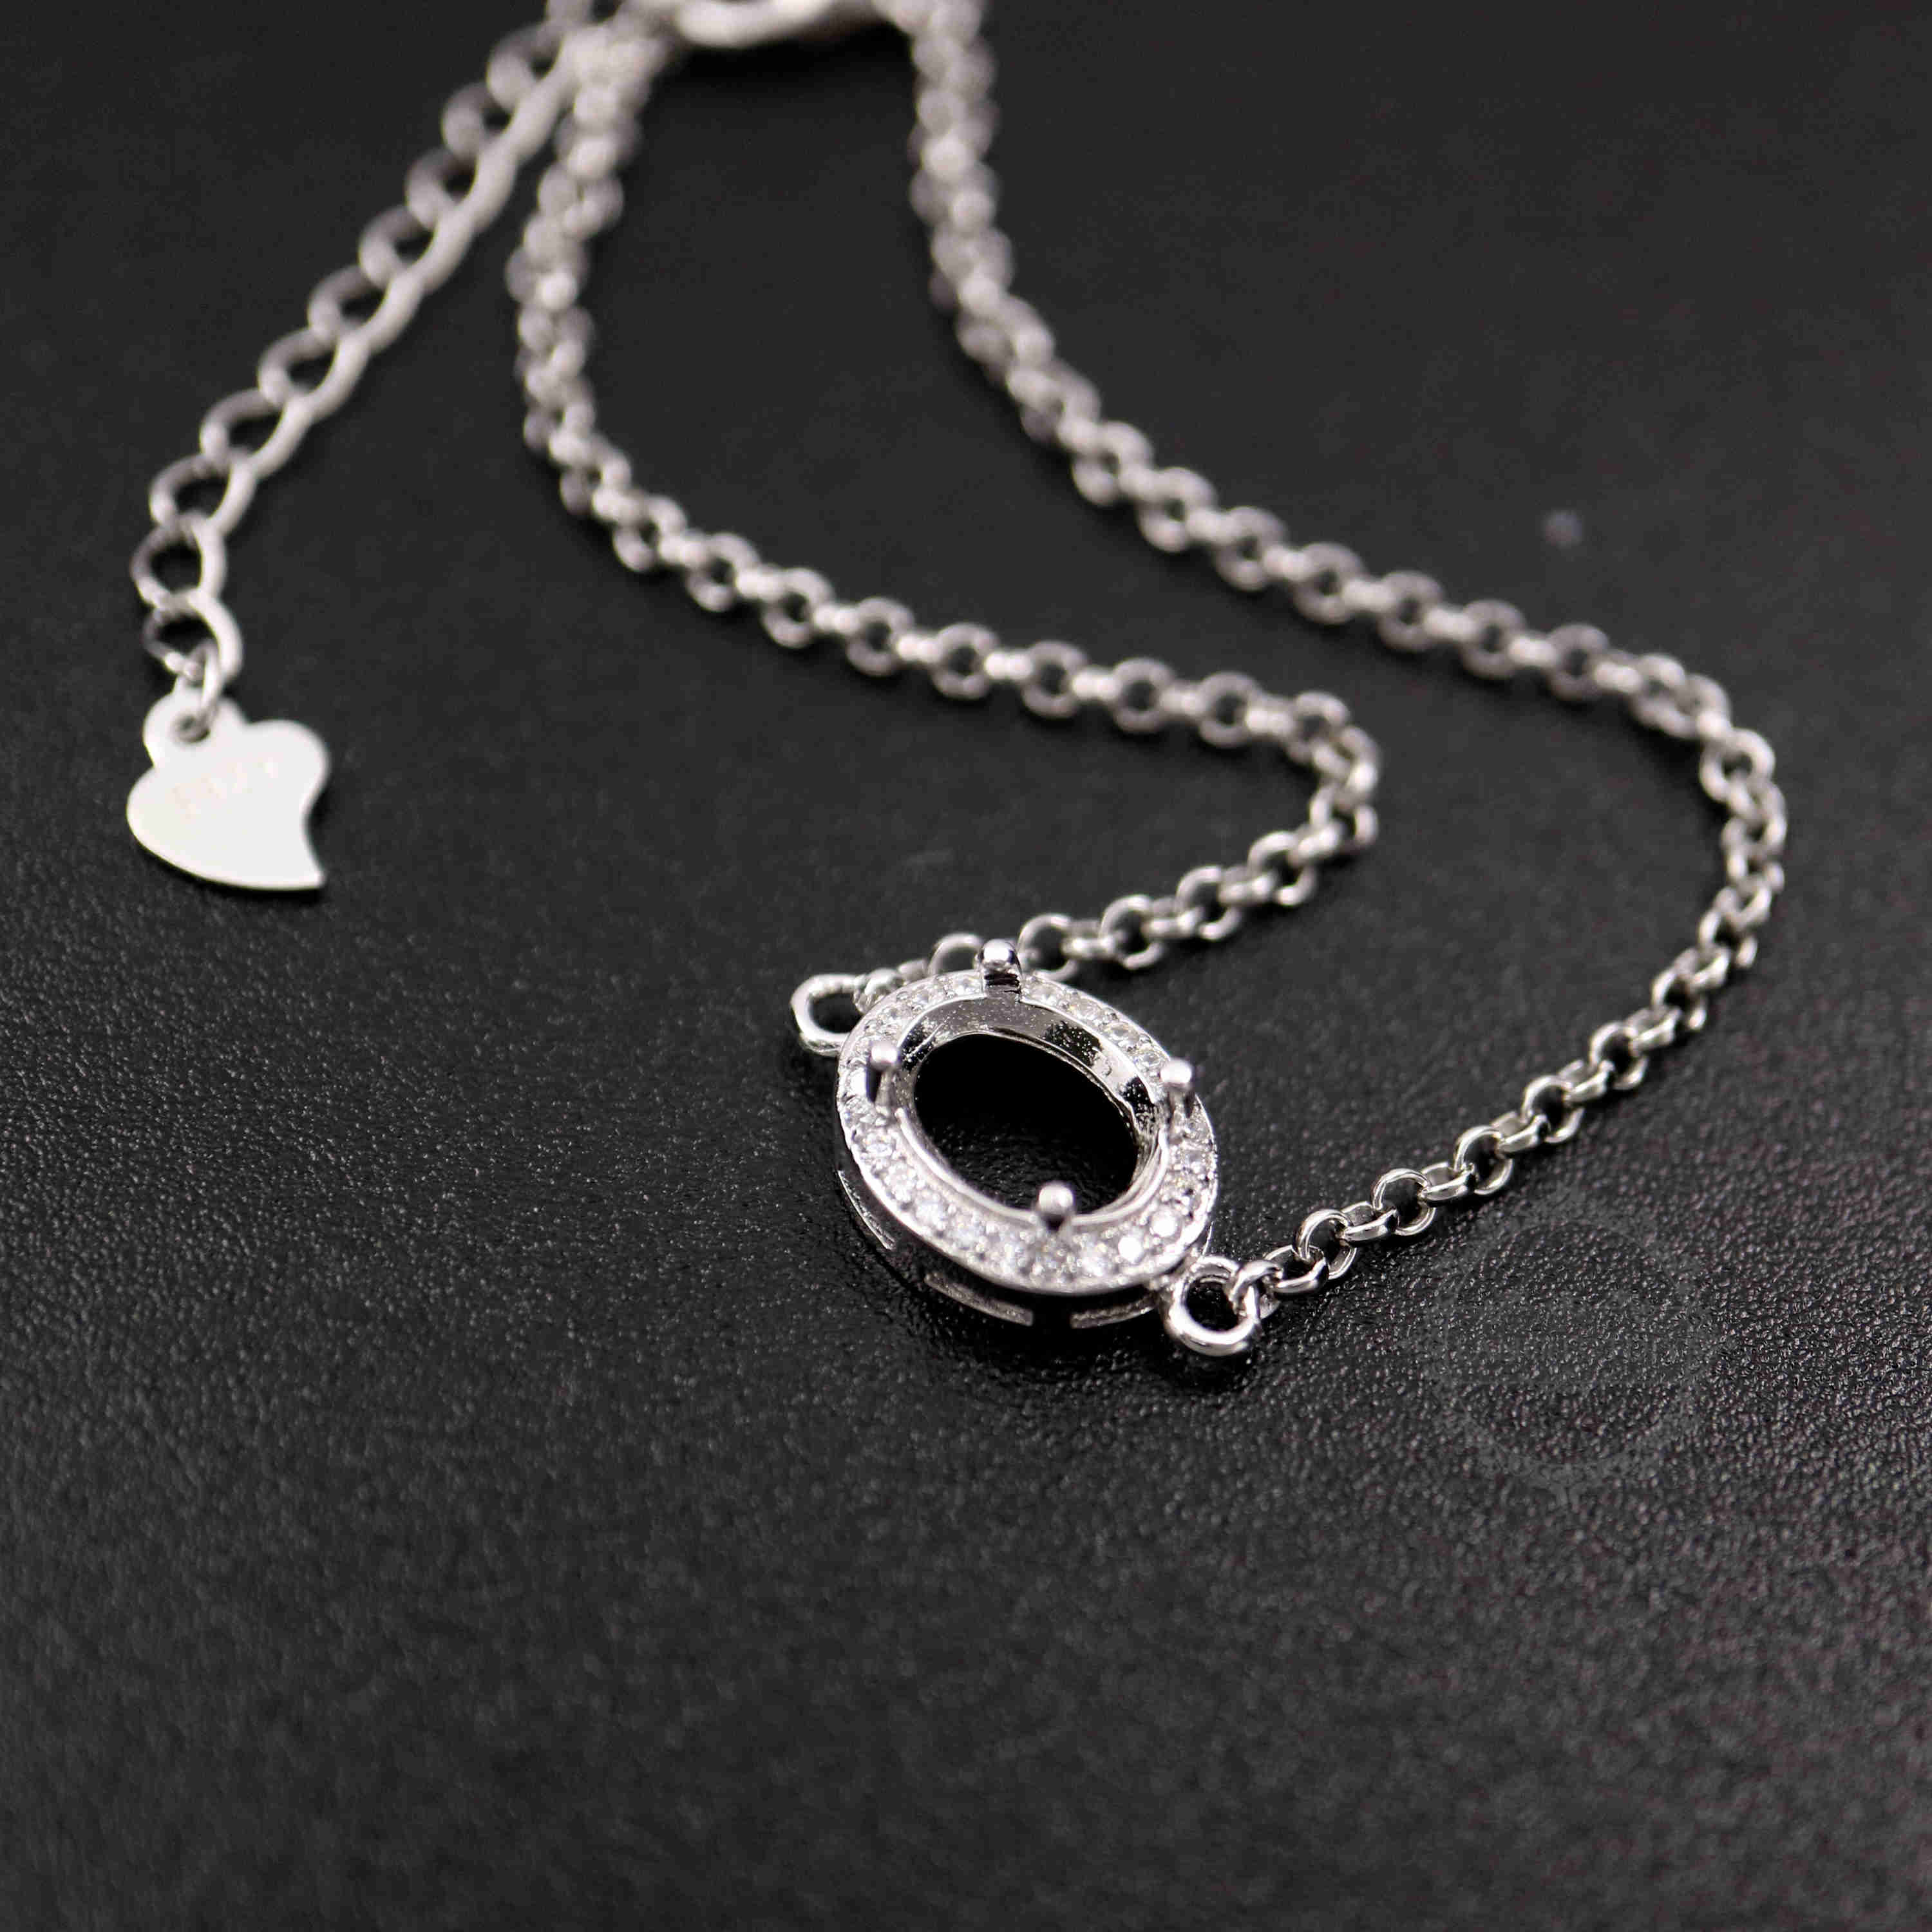 1Pcs 5X7-7X9MM Gems Cz Stone Oval Prong Bezel Settings Solid 925 Sterling Silver DIY Charm Bracelet Tray With 6'' Chain 1900188 - Click Image to Close